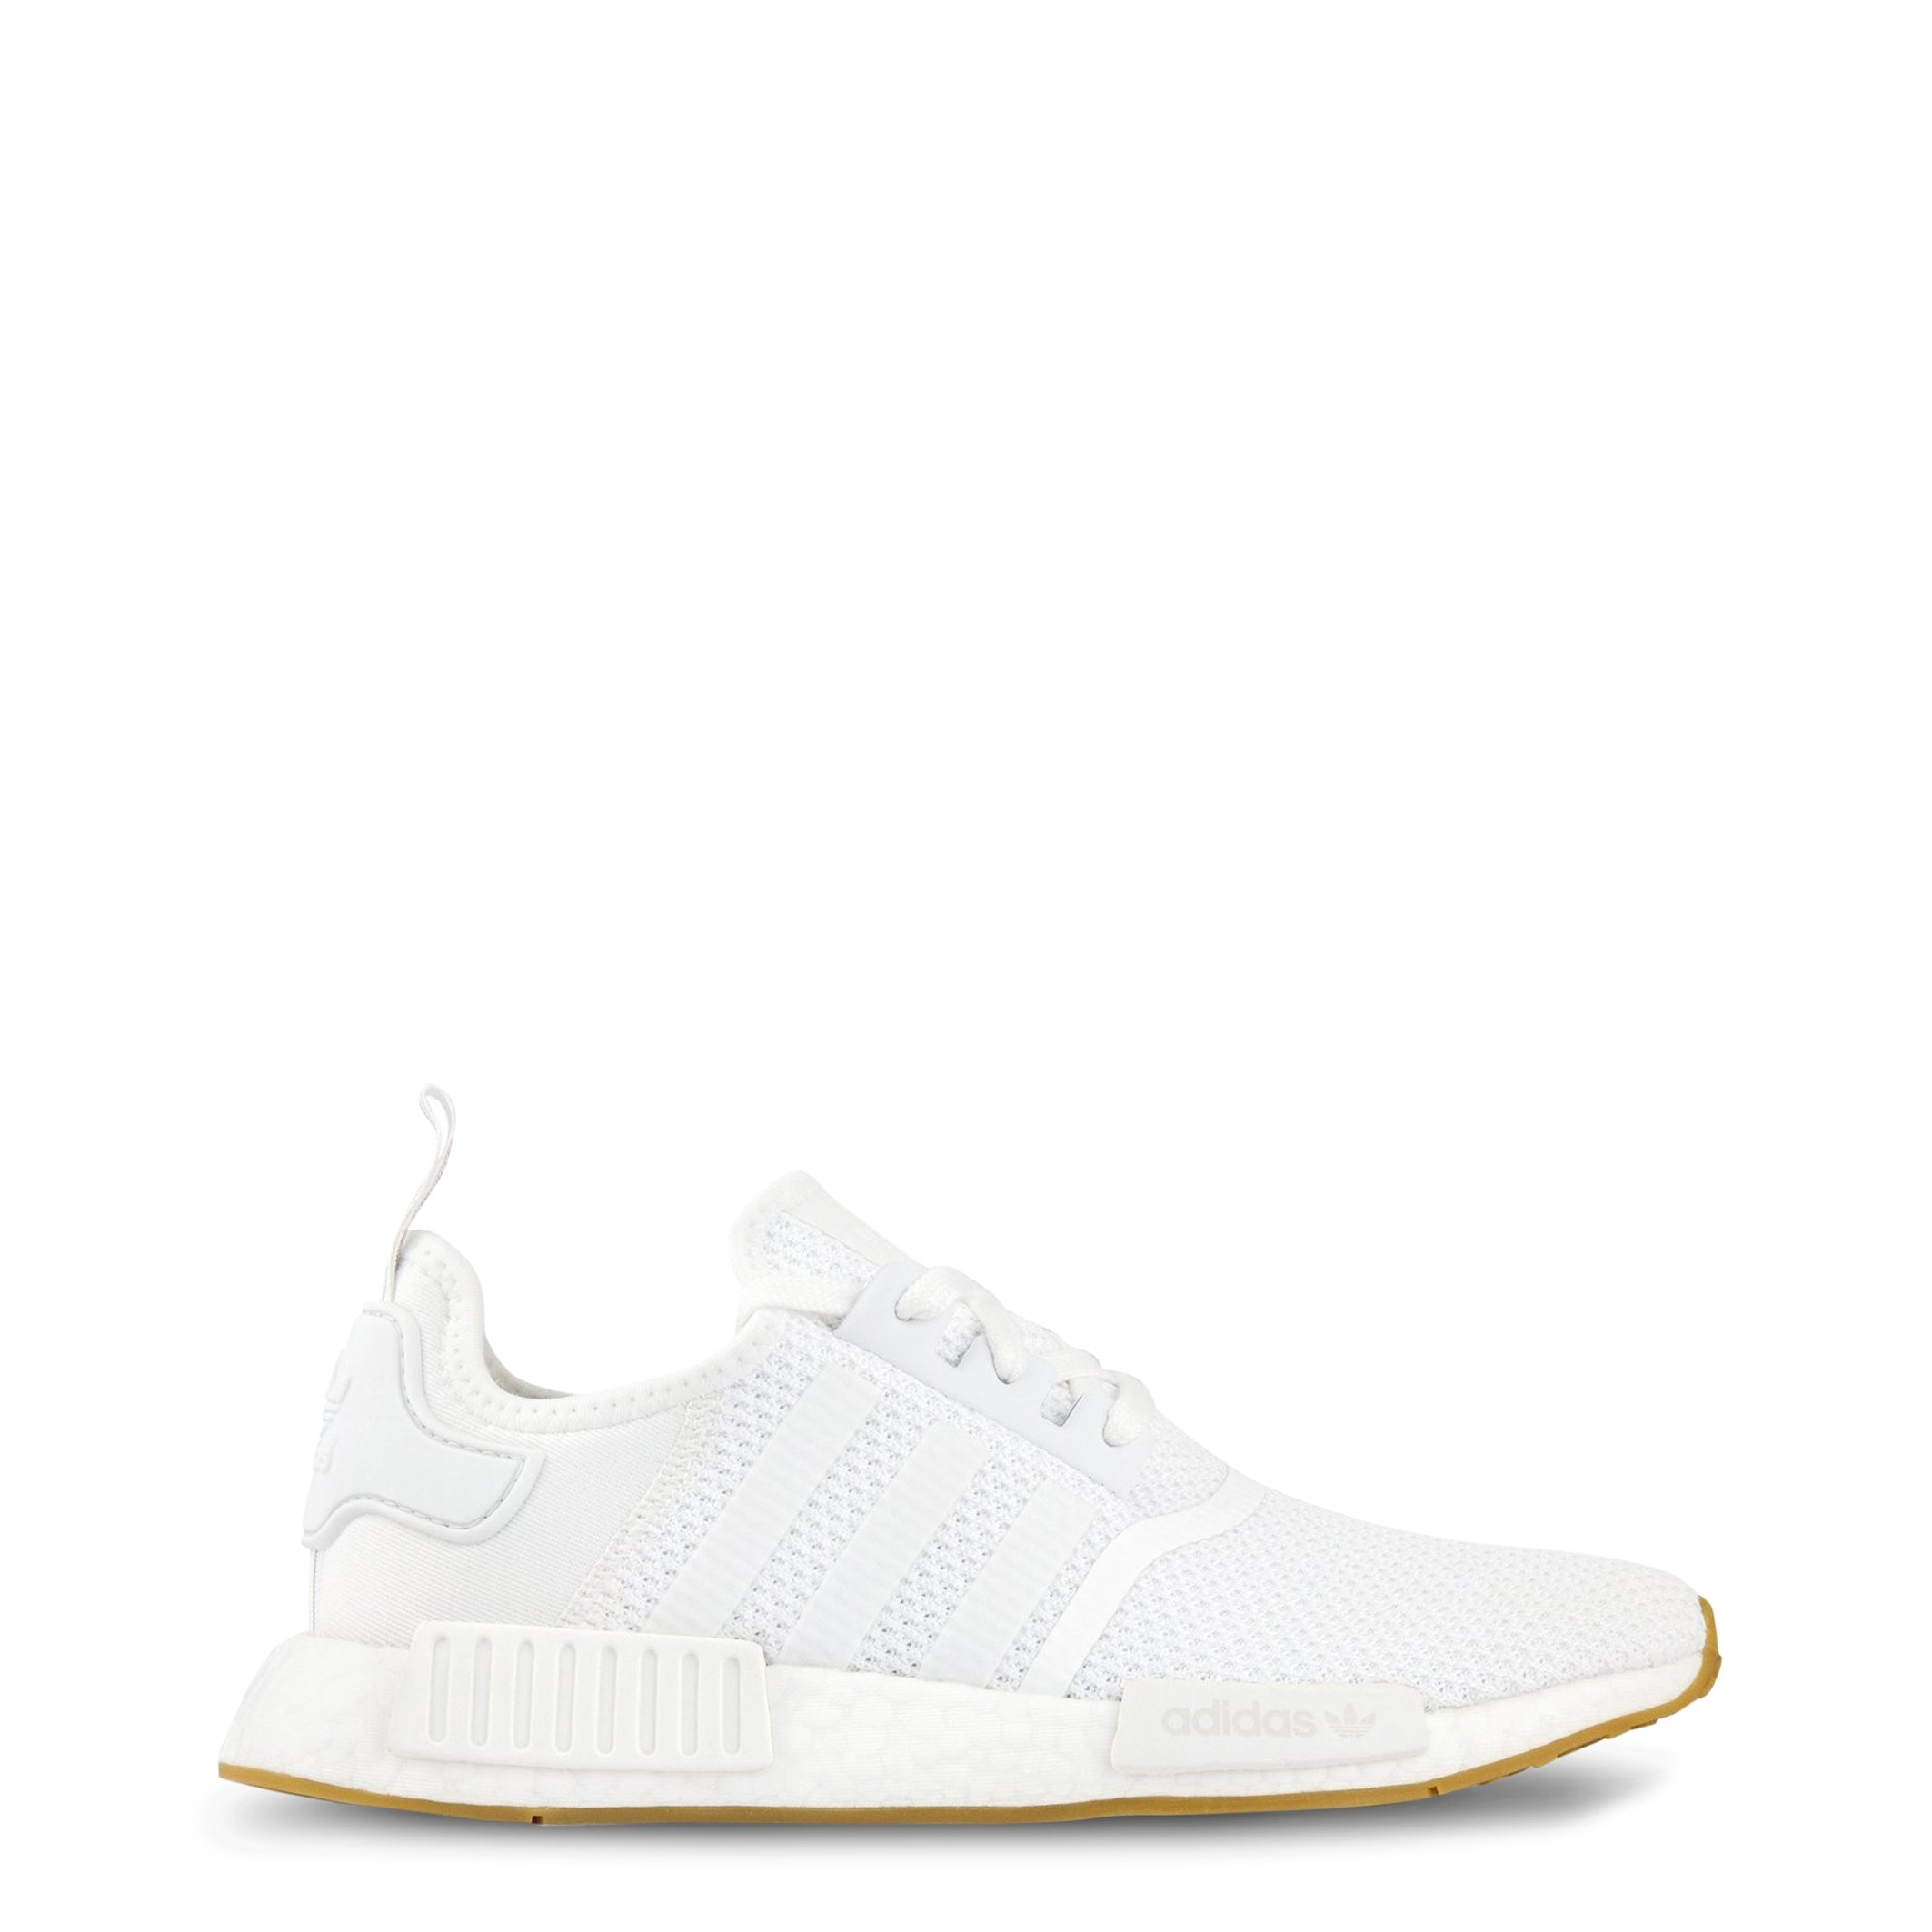 Adidas – NMD-R1_STLT – Shoes Sneakers – White / Uk 3.5 – Love Your Fashion